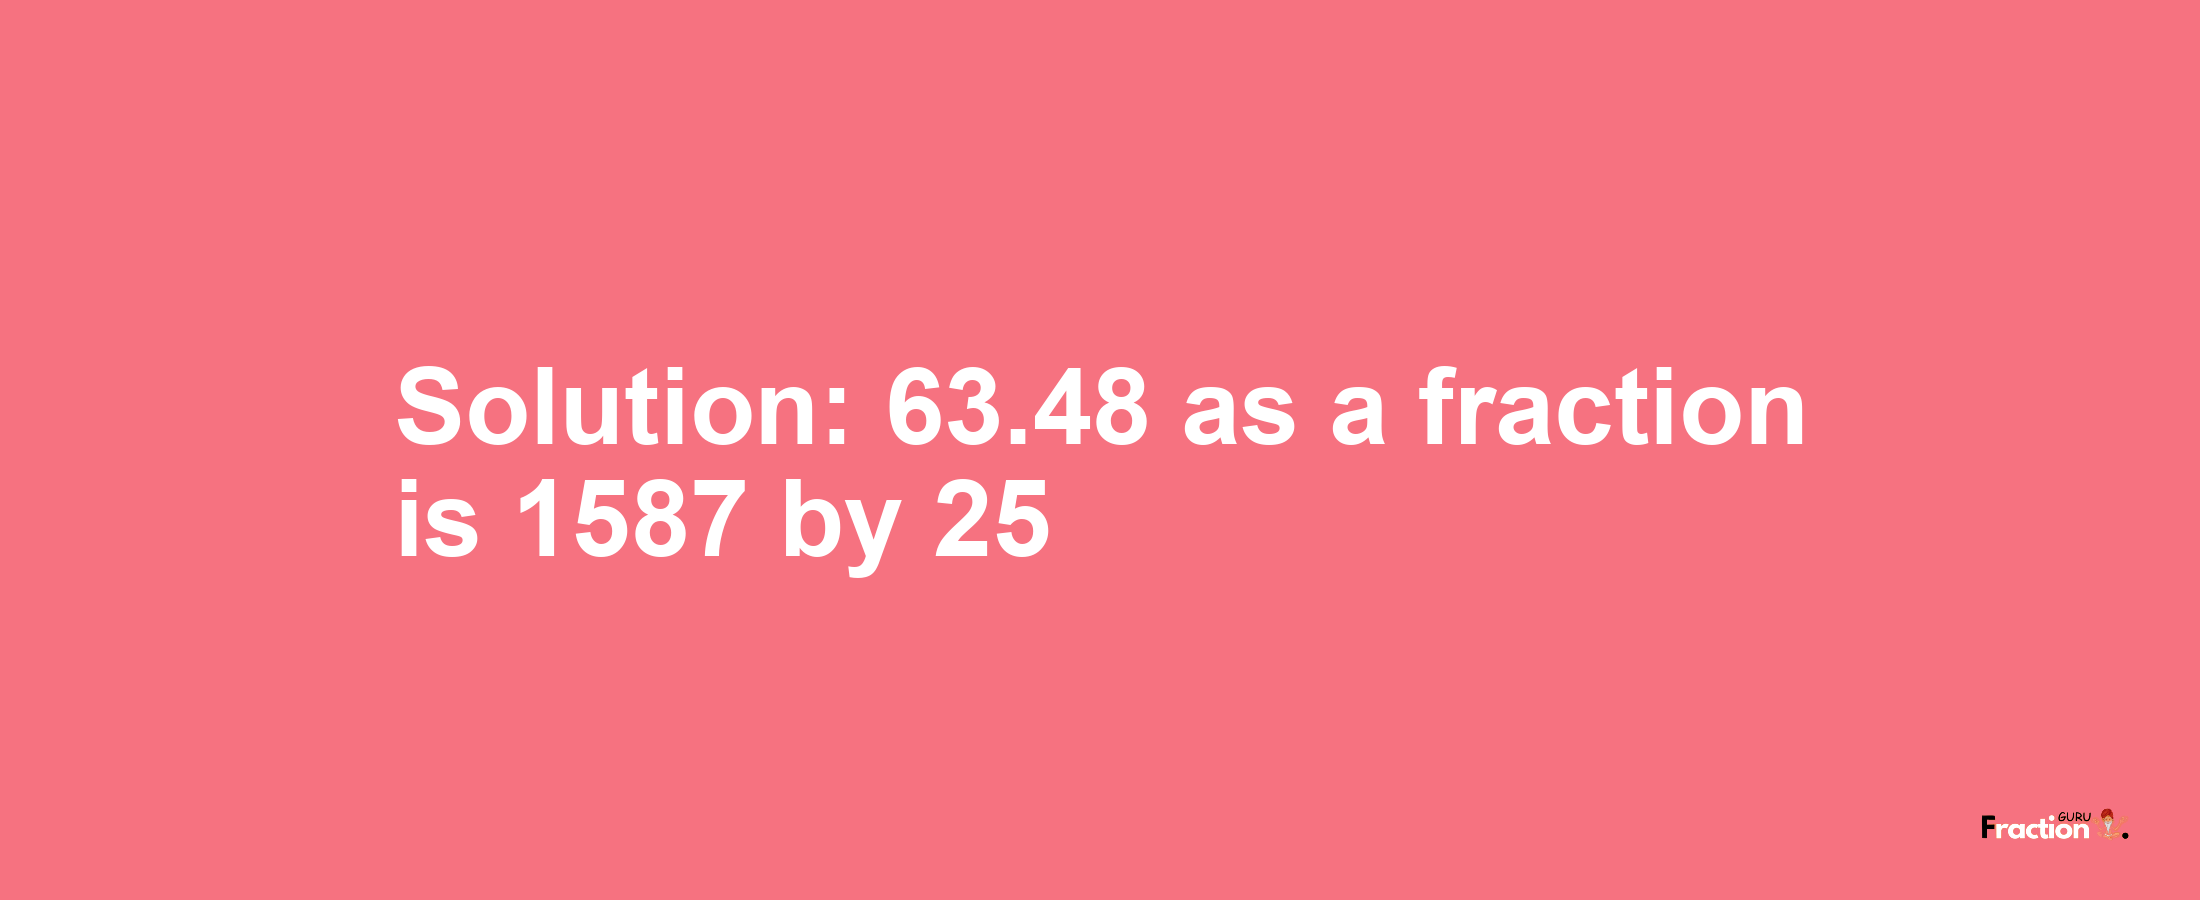 Solution:63.48 as a fraction is 1587/25